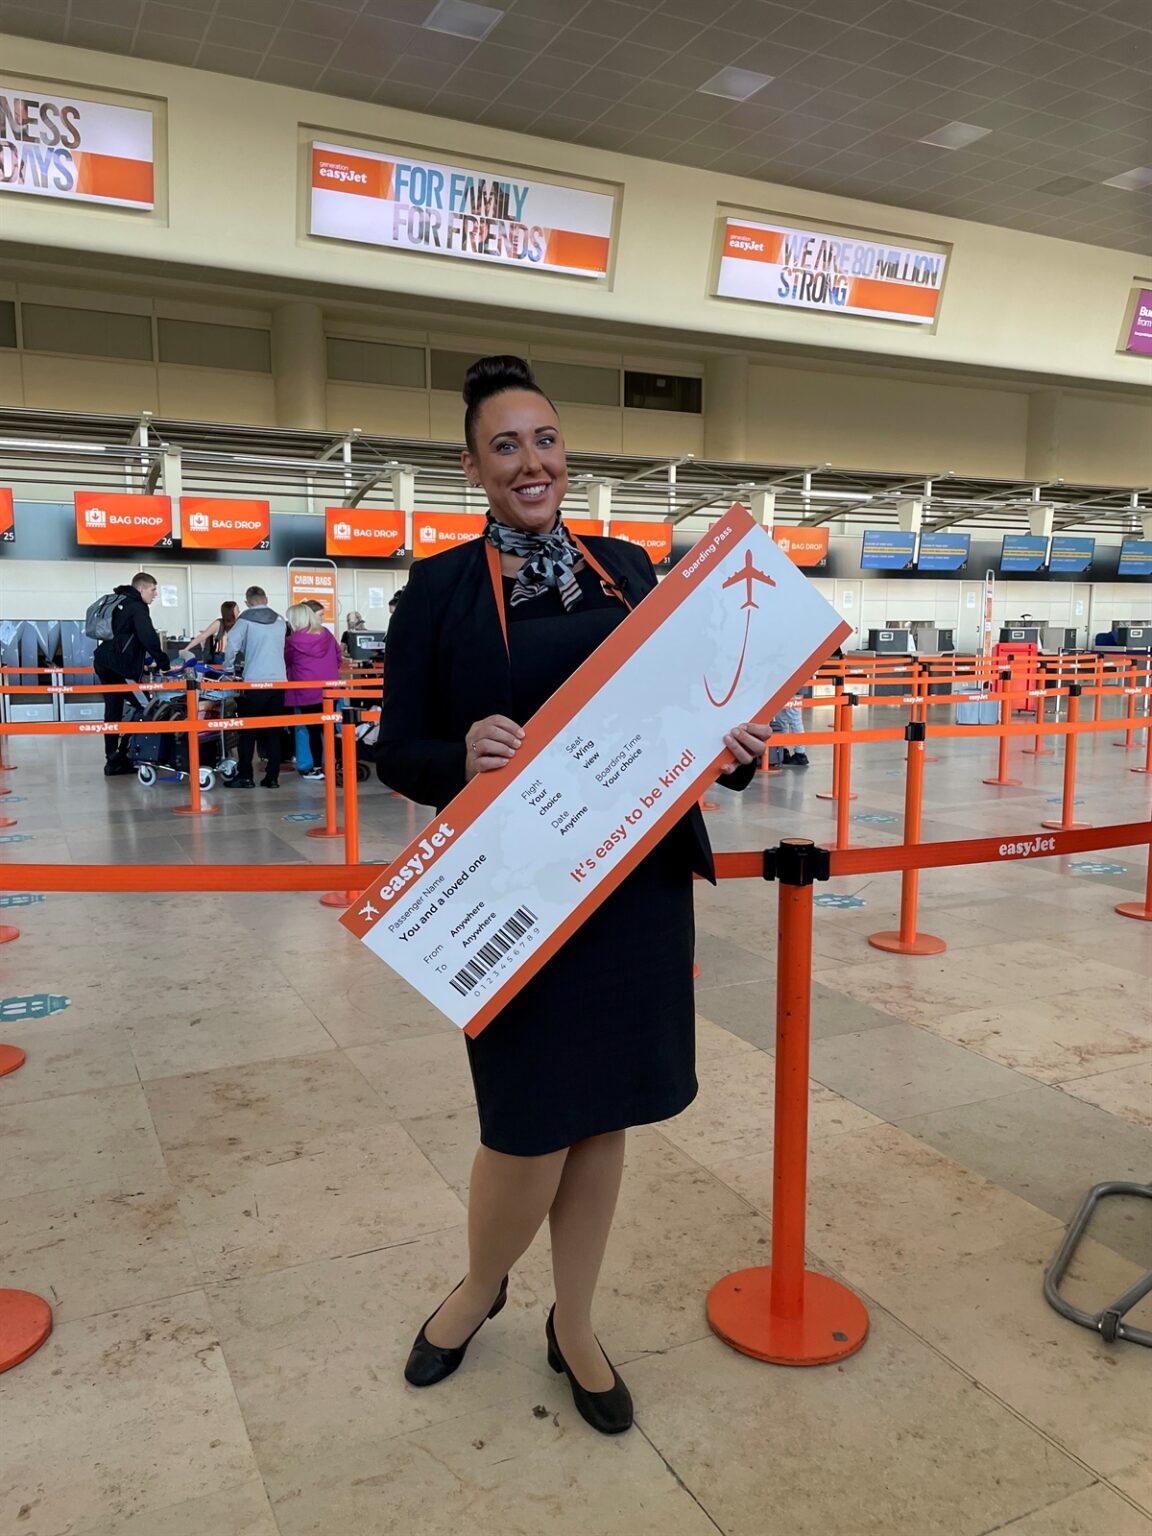 Travel PR News easyJet and easyJet holidays surprises passengers with